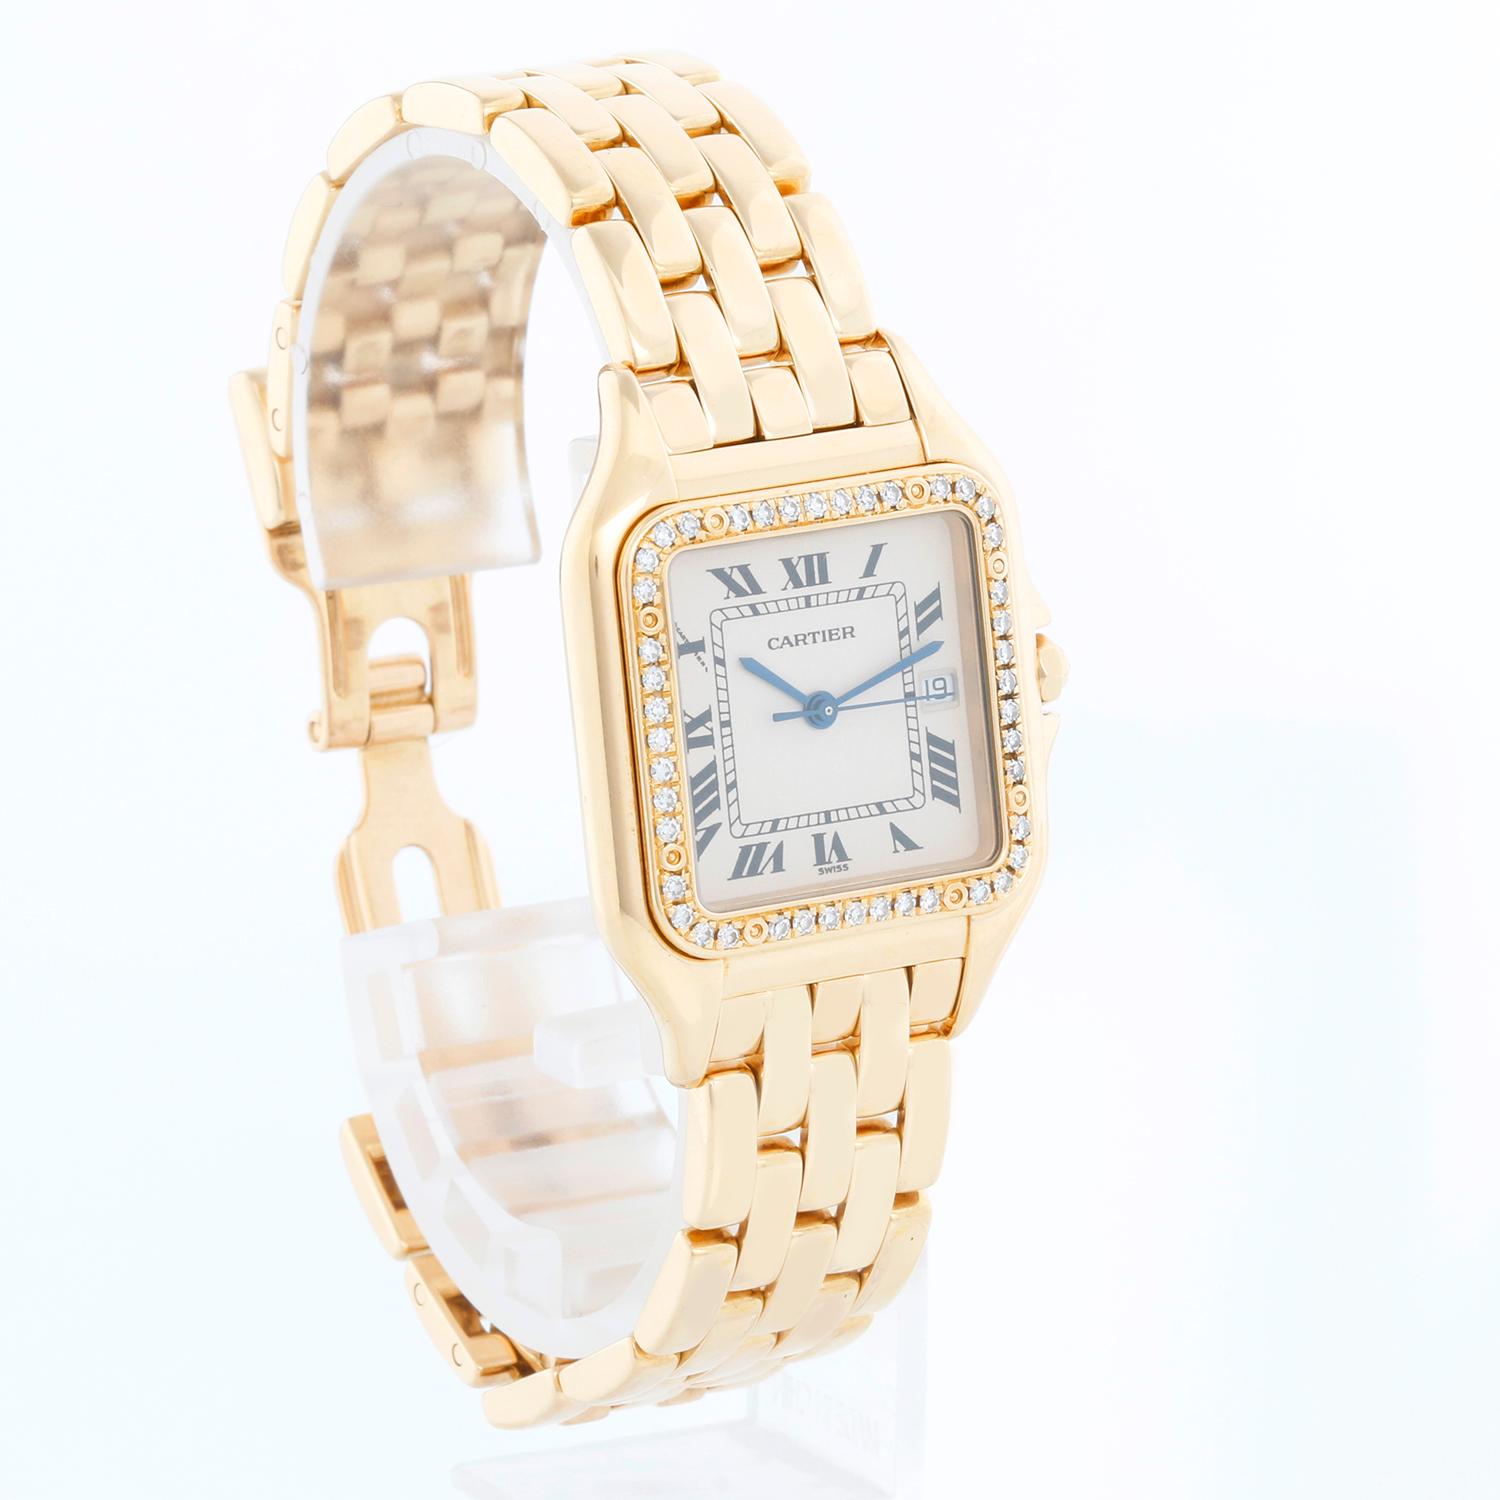 Cartier Panther 18k Yellow Gold Men's Quartz Watch with Date & Diamonds - Quartz. 18k yellow gold case with factory diamond bezel  (27mm x 38mm). Ivory colored dial with black Roman numerals and date at 3 o'clock. 18k yellow gold Cartier Panther